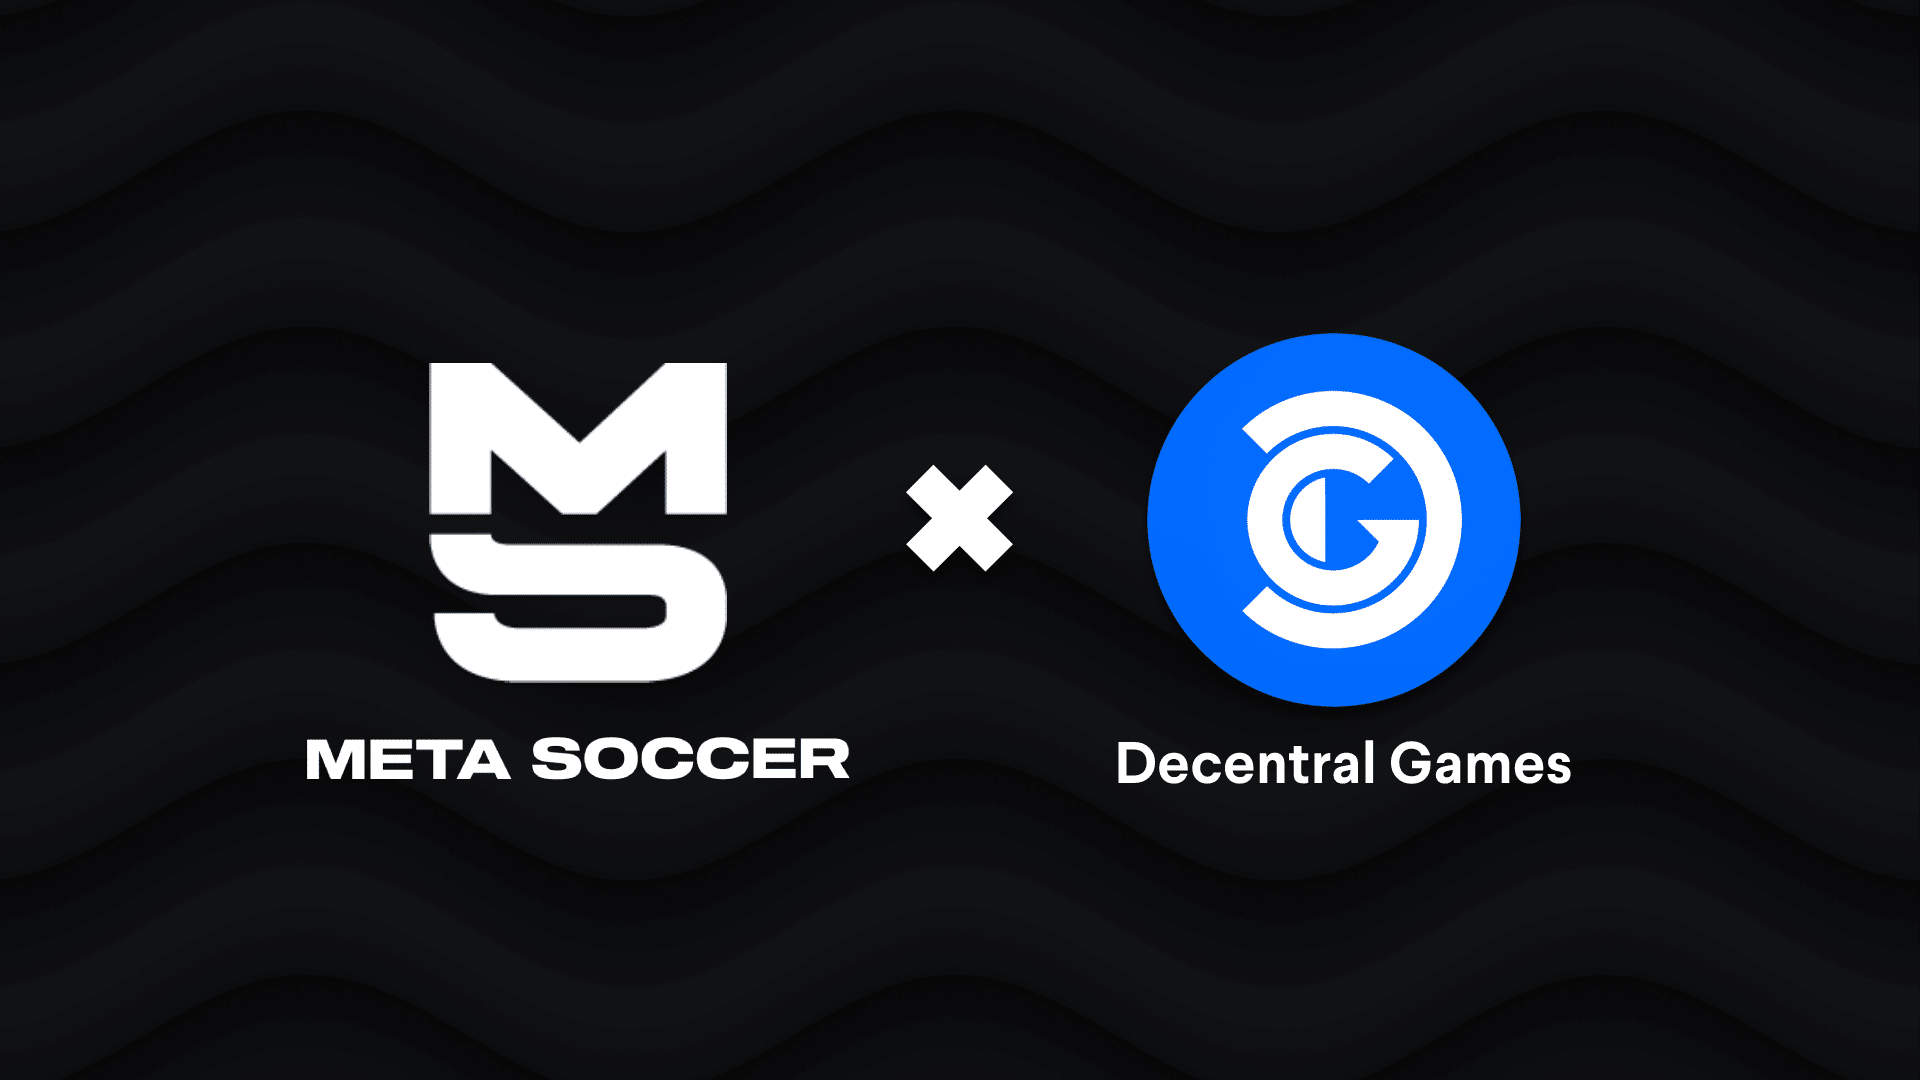 MetaSoccer and Decentral Games logos